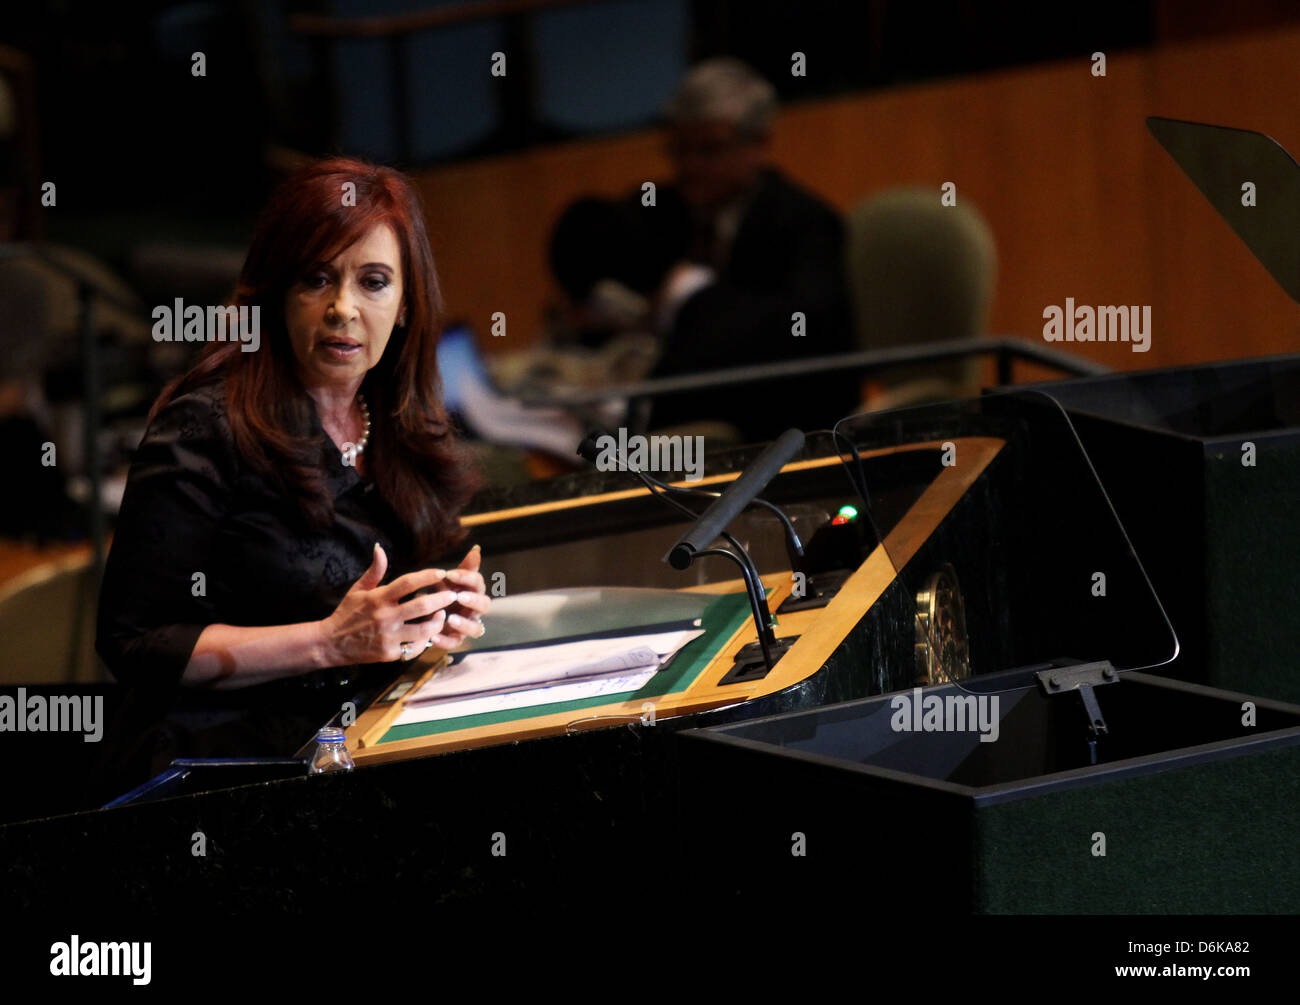 President of Argentina, Cristina Fernández de Kirchner delivers an address at the United Nations General Assembly at UN Stock Photo